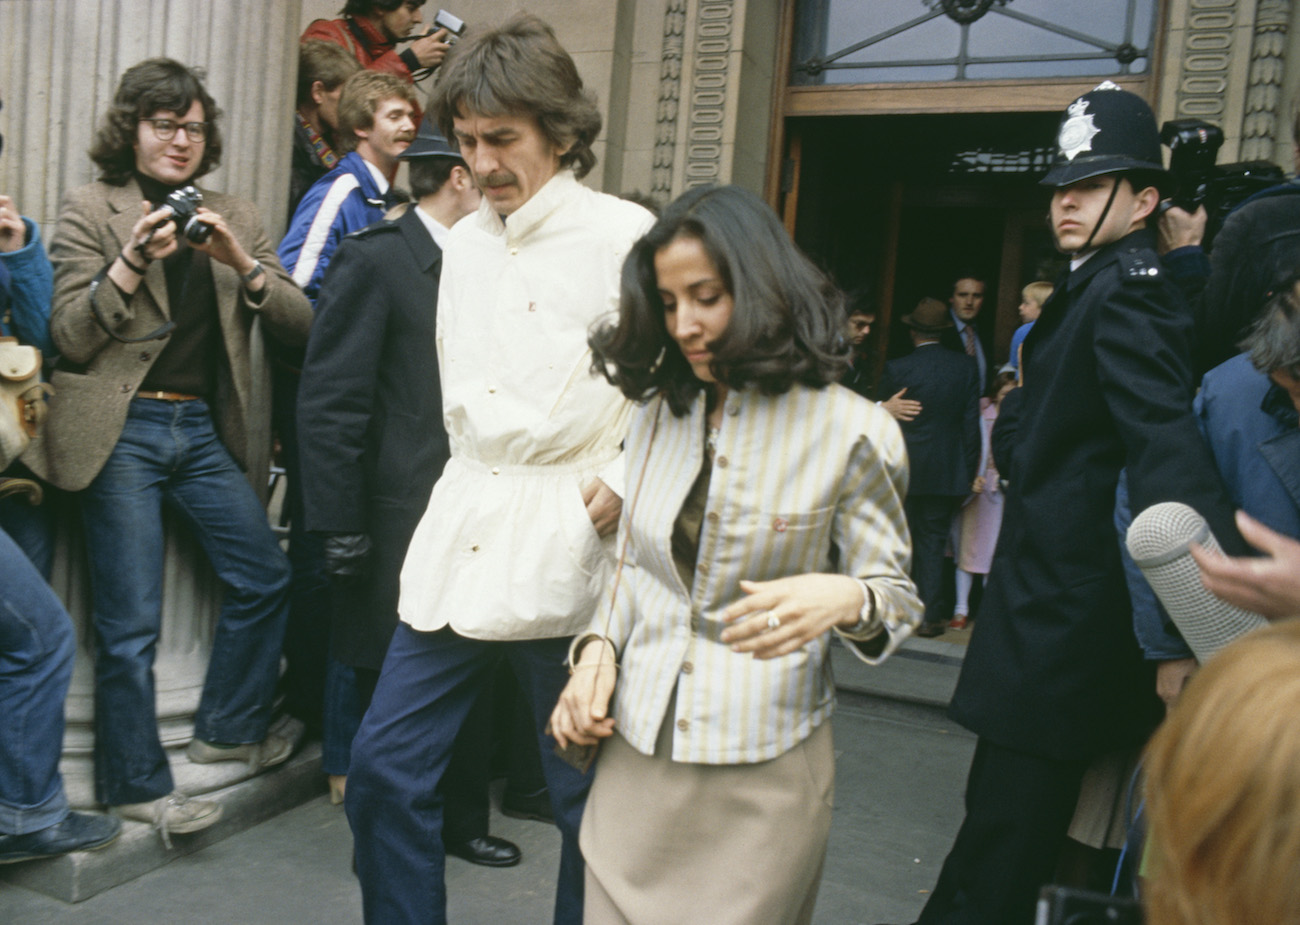 George Harrison and his wife Olivia coming out of Marylebone Register Office after Ringo Starr and Barbara Bach's wedding in 1981.